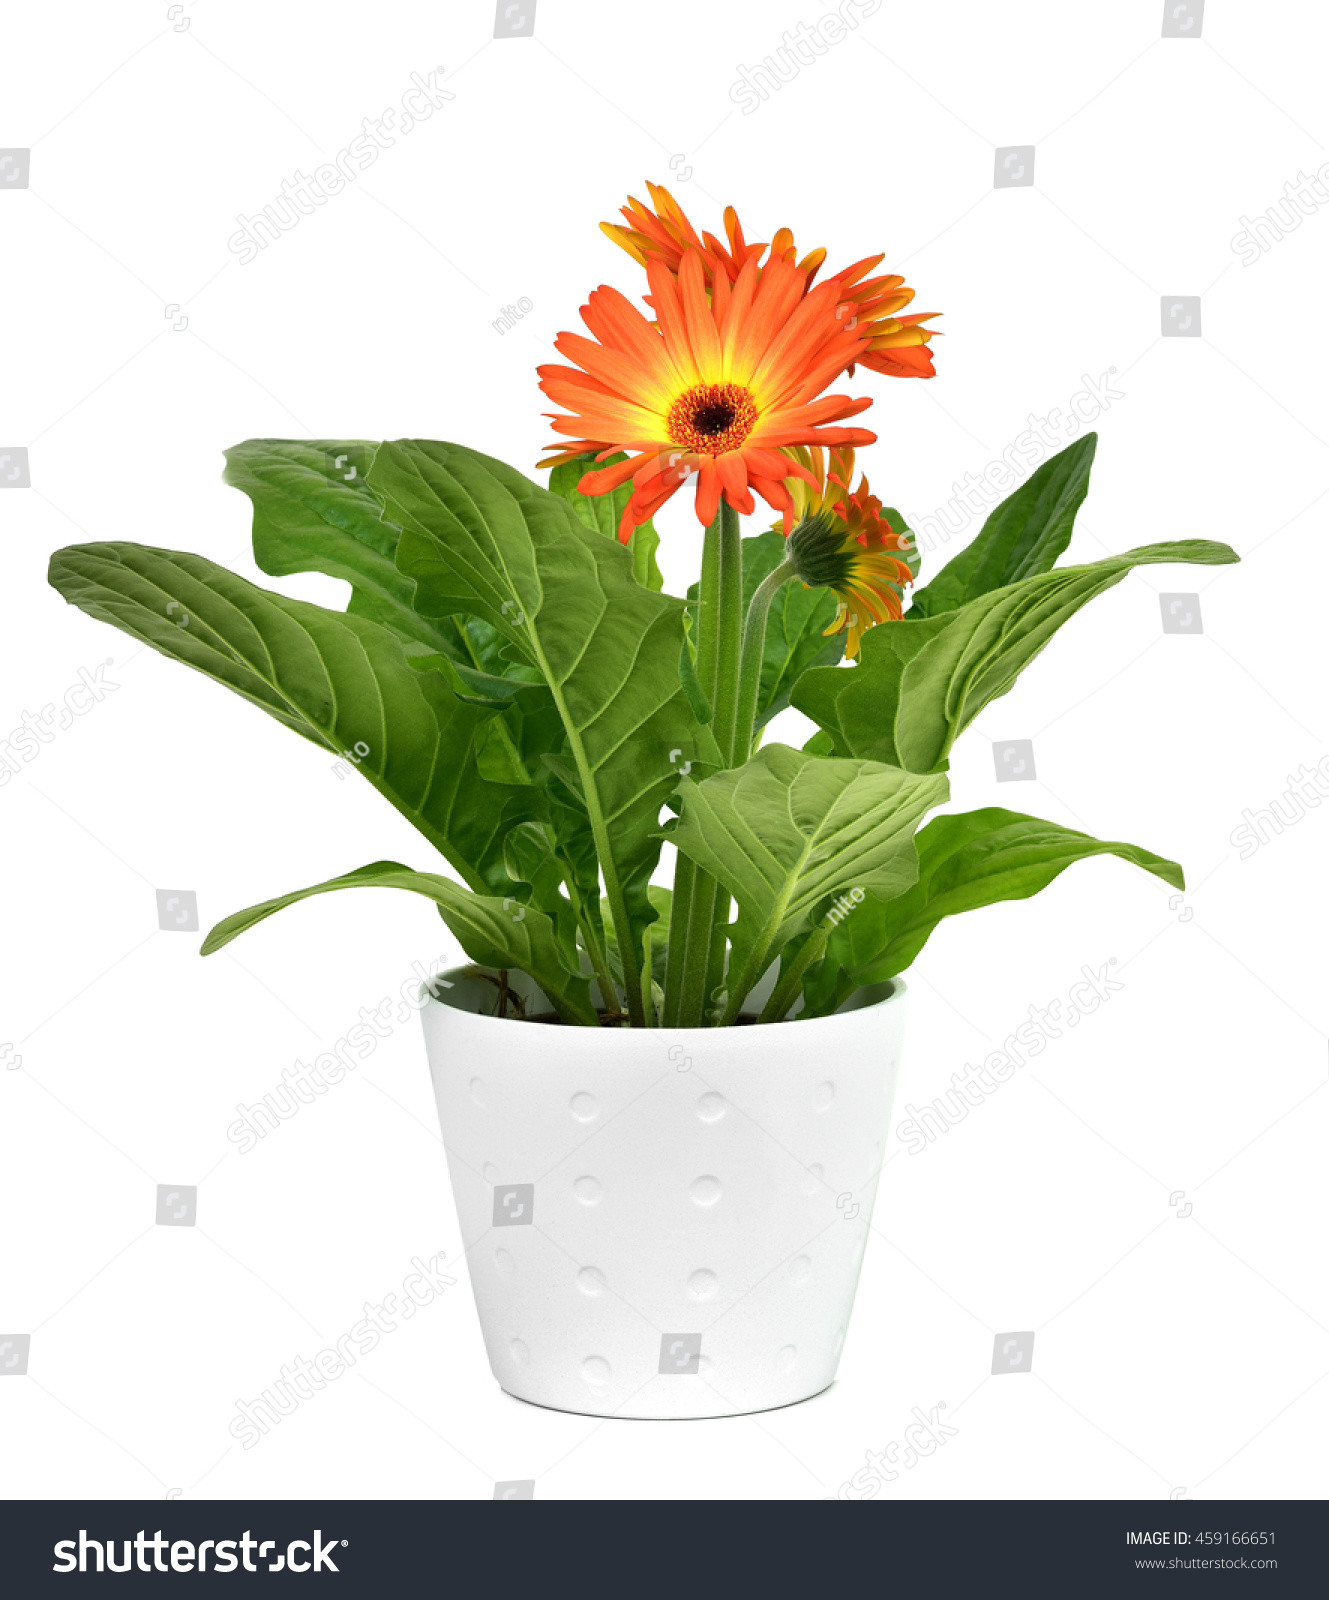 19 Amazing Gerbera Daisy In Vase 2024 free download gerbera daisy in vase of closeup orange gerbera daisy plant white stock photo edit now intended for closeup of an orange gerbera daisy plant in a white ceramic plant pot on a